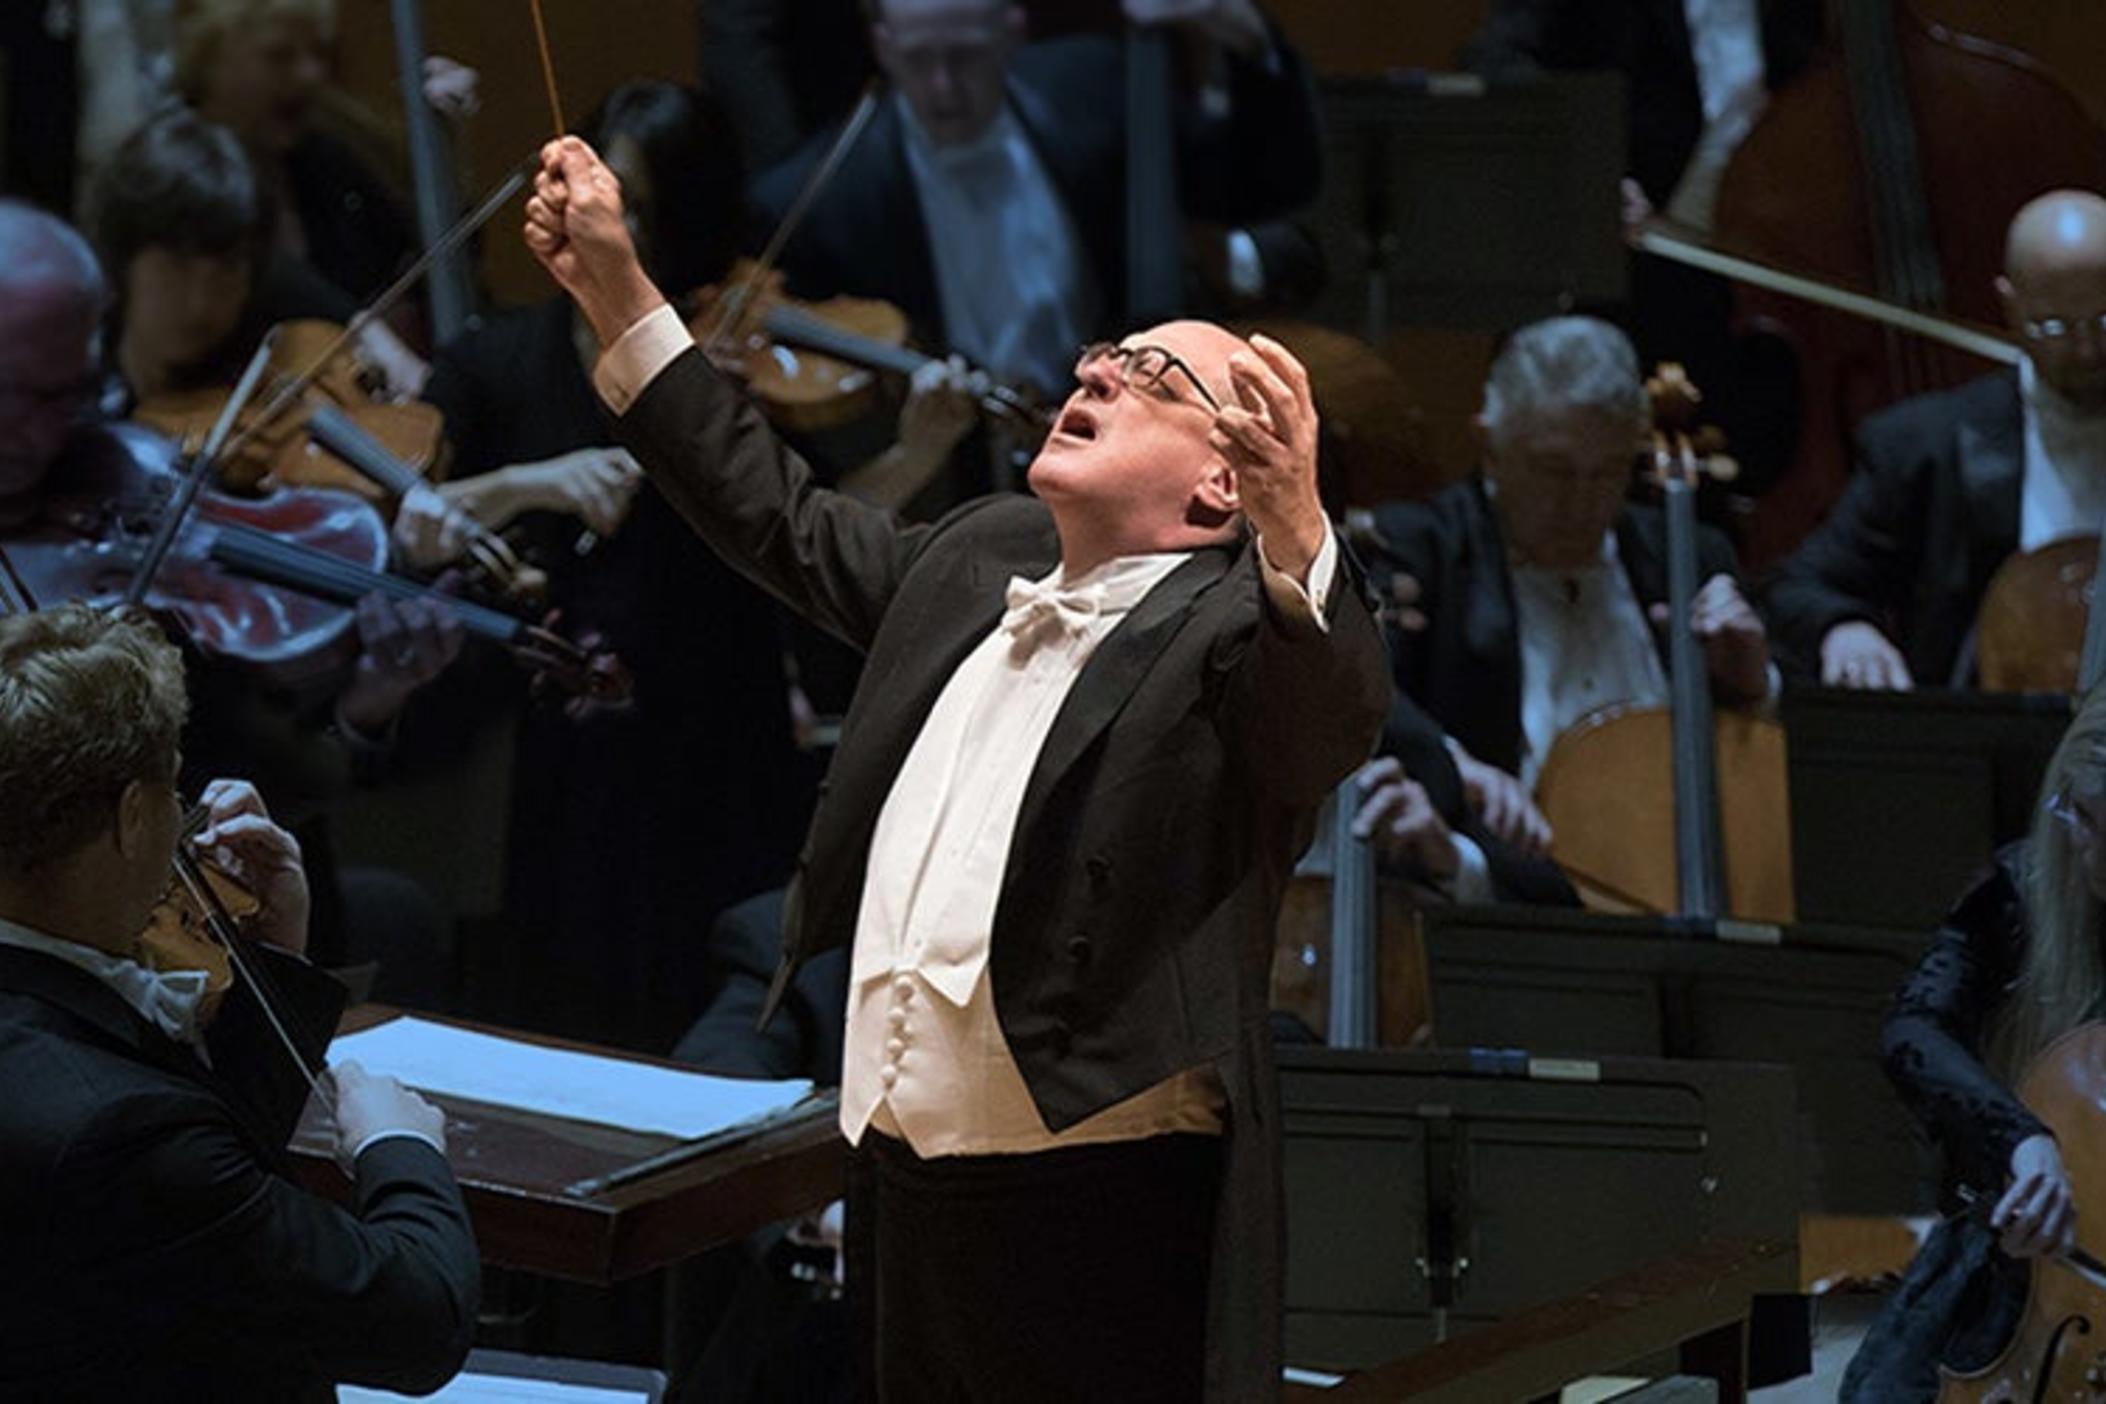 Robert Spano spent more than two decades as music director of the Atlanta Symphony Orchestra. He left in 2022 with the arrival of current music director Nathalie Stutzmann. Spano returns to the Woodruff this week for a two-week residency featuring audience favorites and a premiere. 